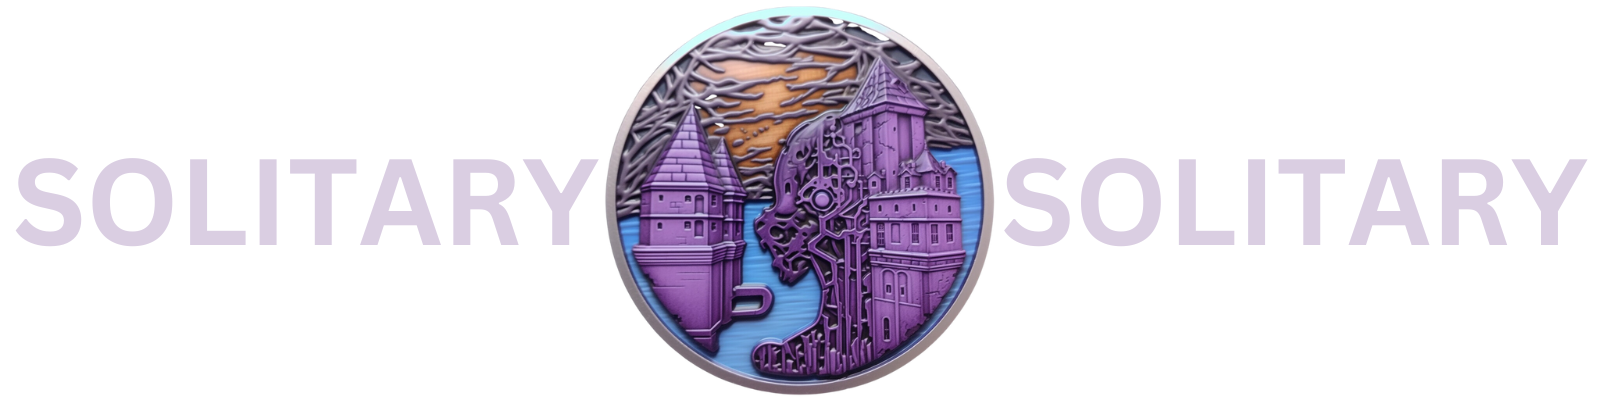 Silver Solitary Medallion with a remote castle